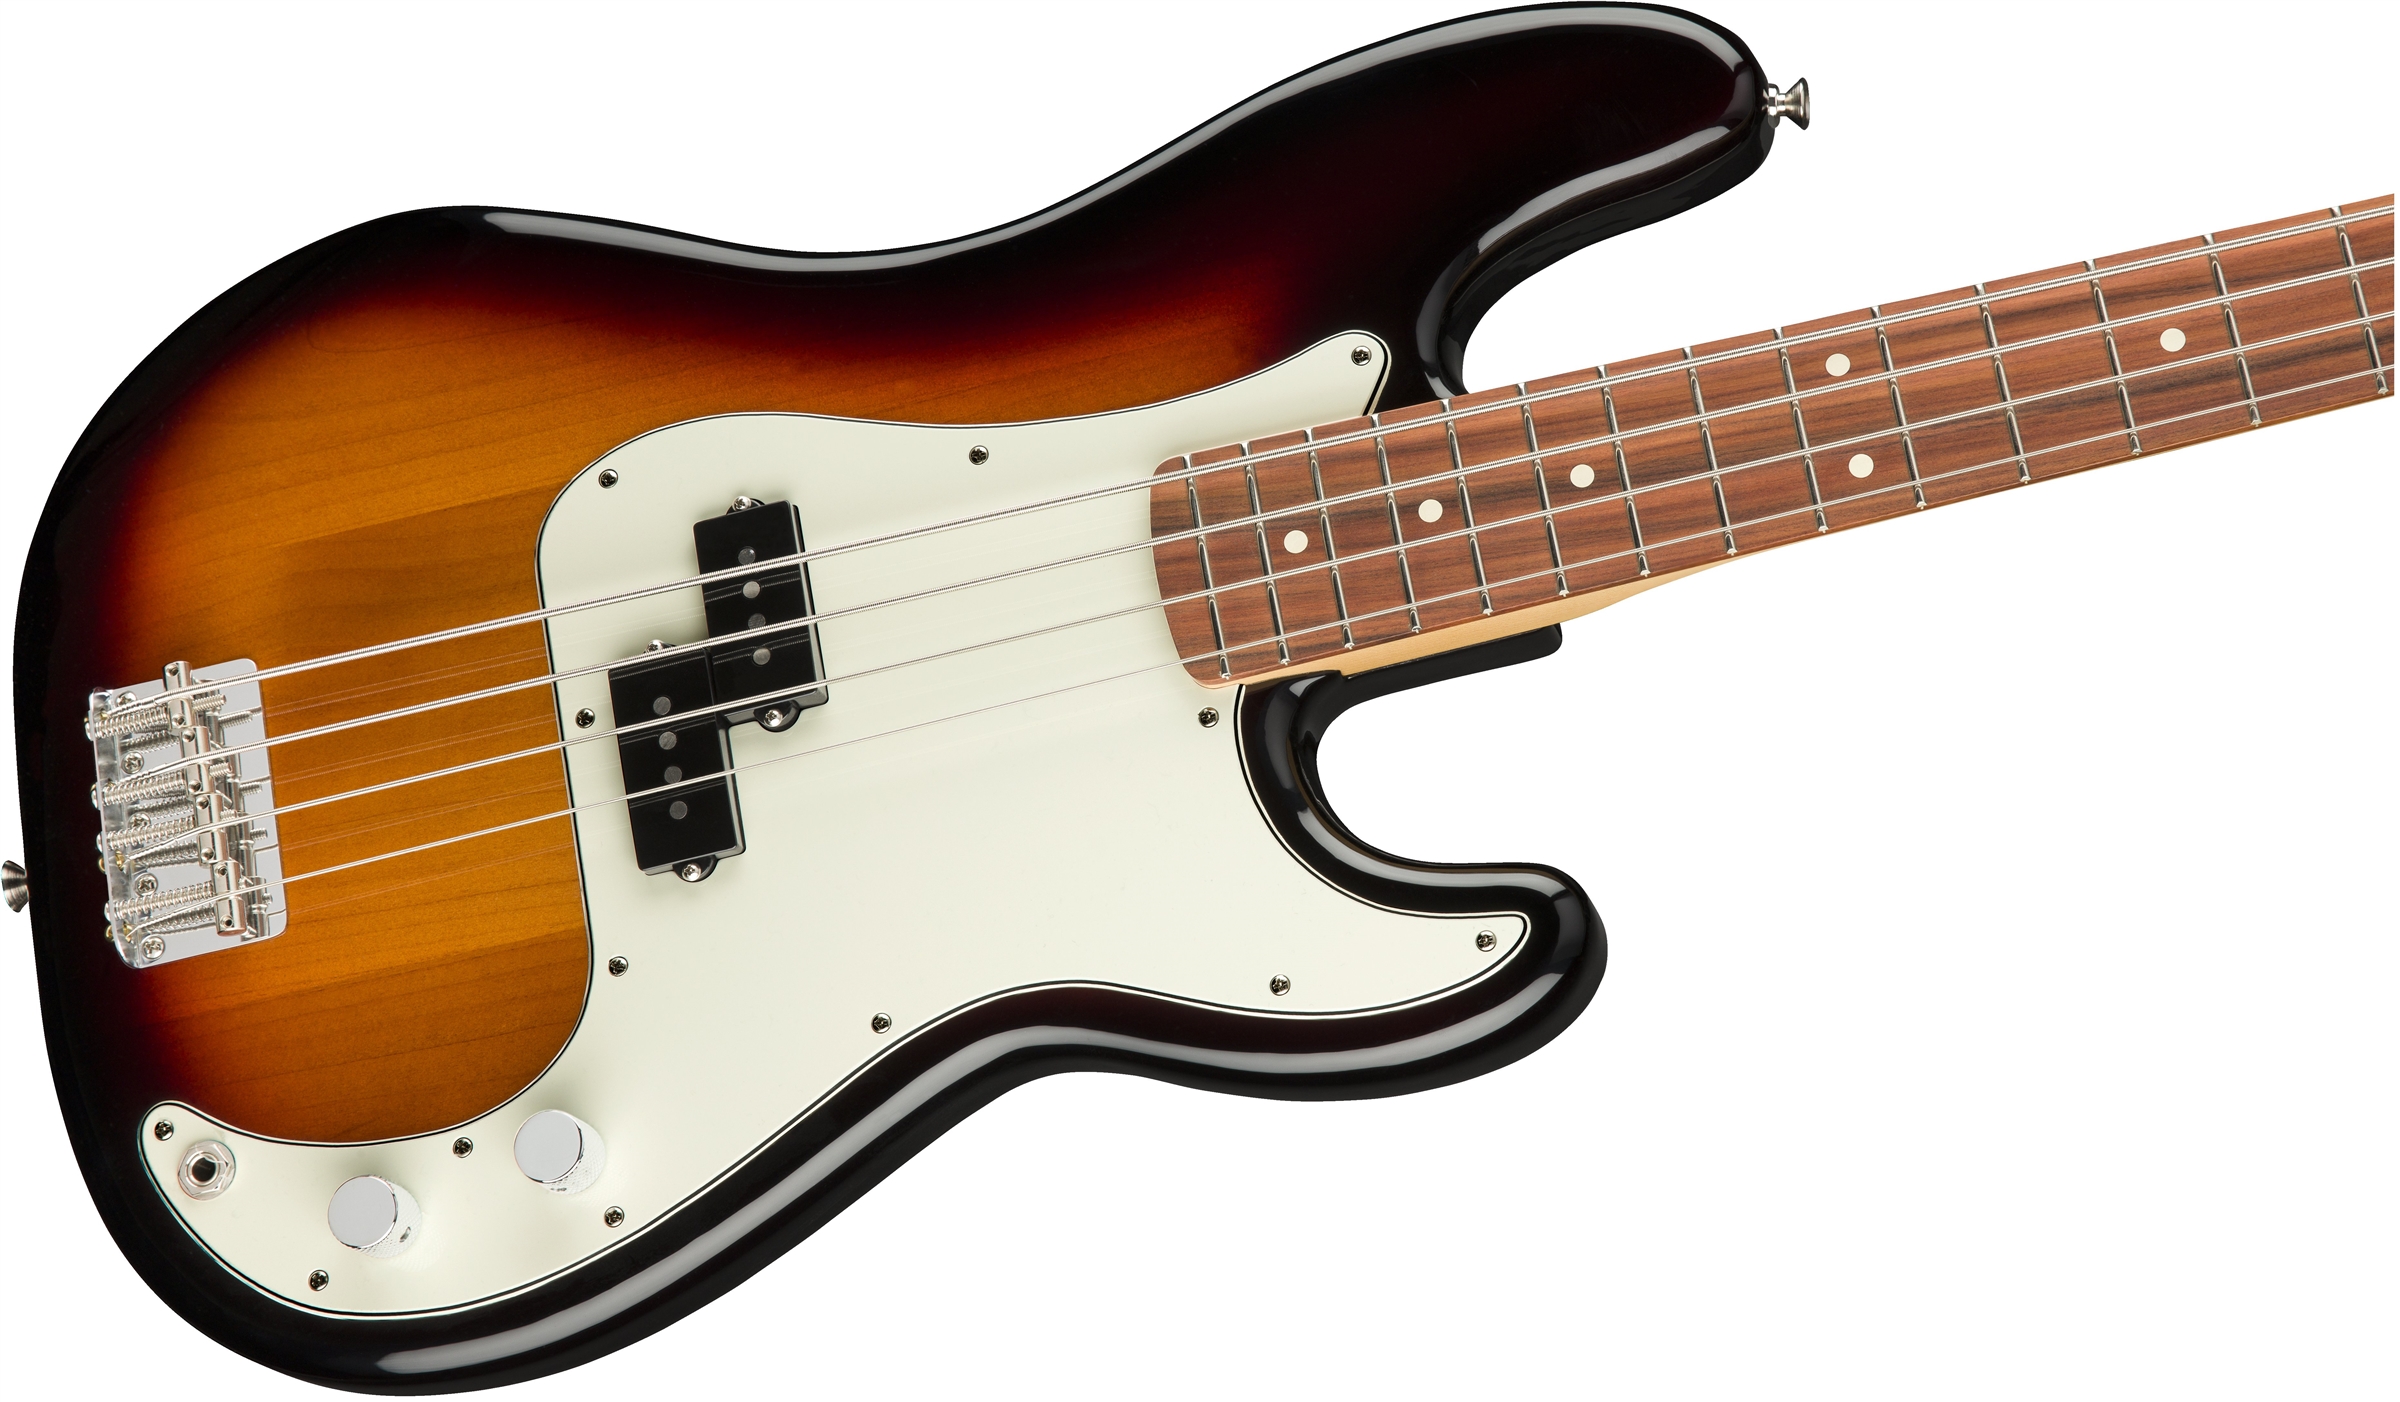 Fender Precision Bass Player Mex Pf - 3-color Sunburst - Solid body electric bass - Variation 1